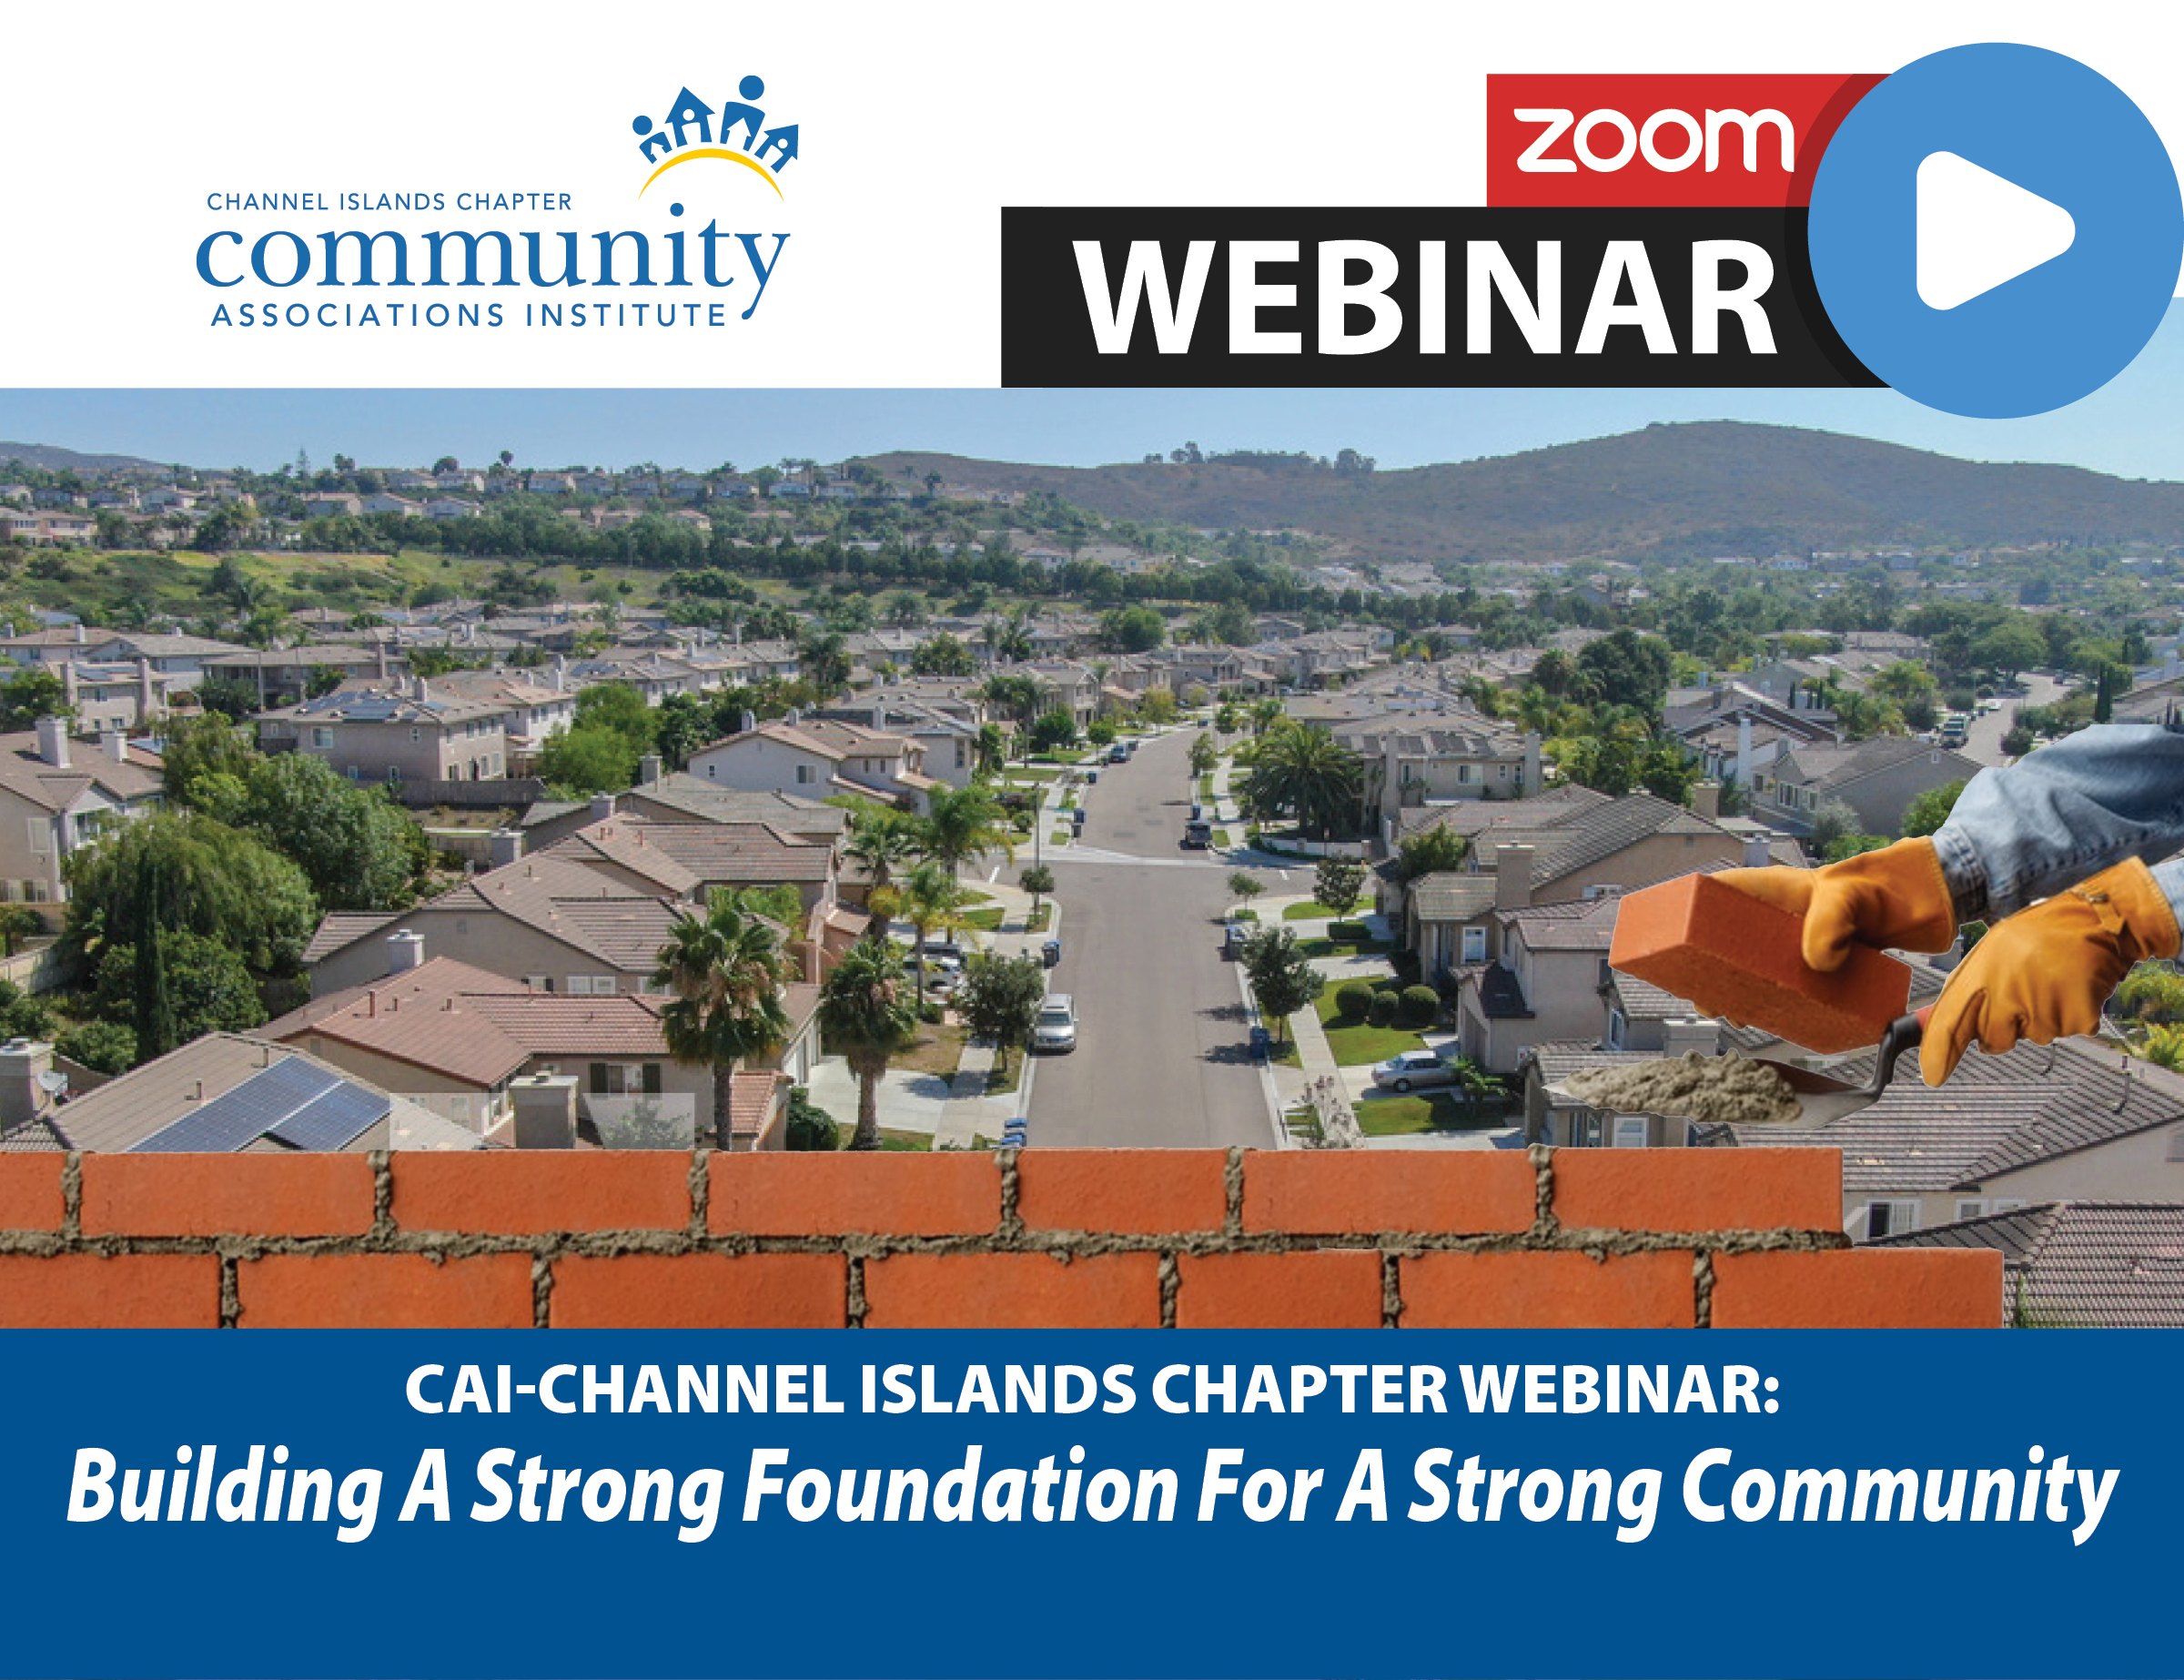 "Building A Strong Foundation For A Strong Community"